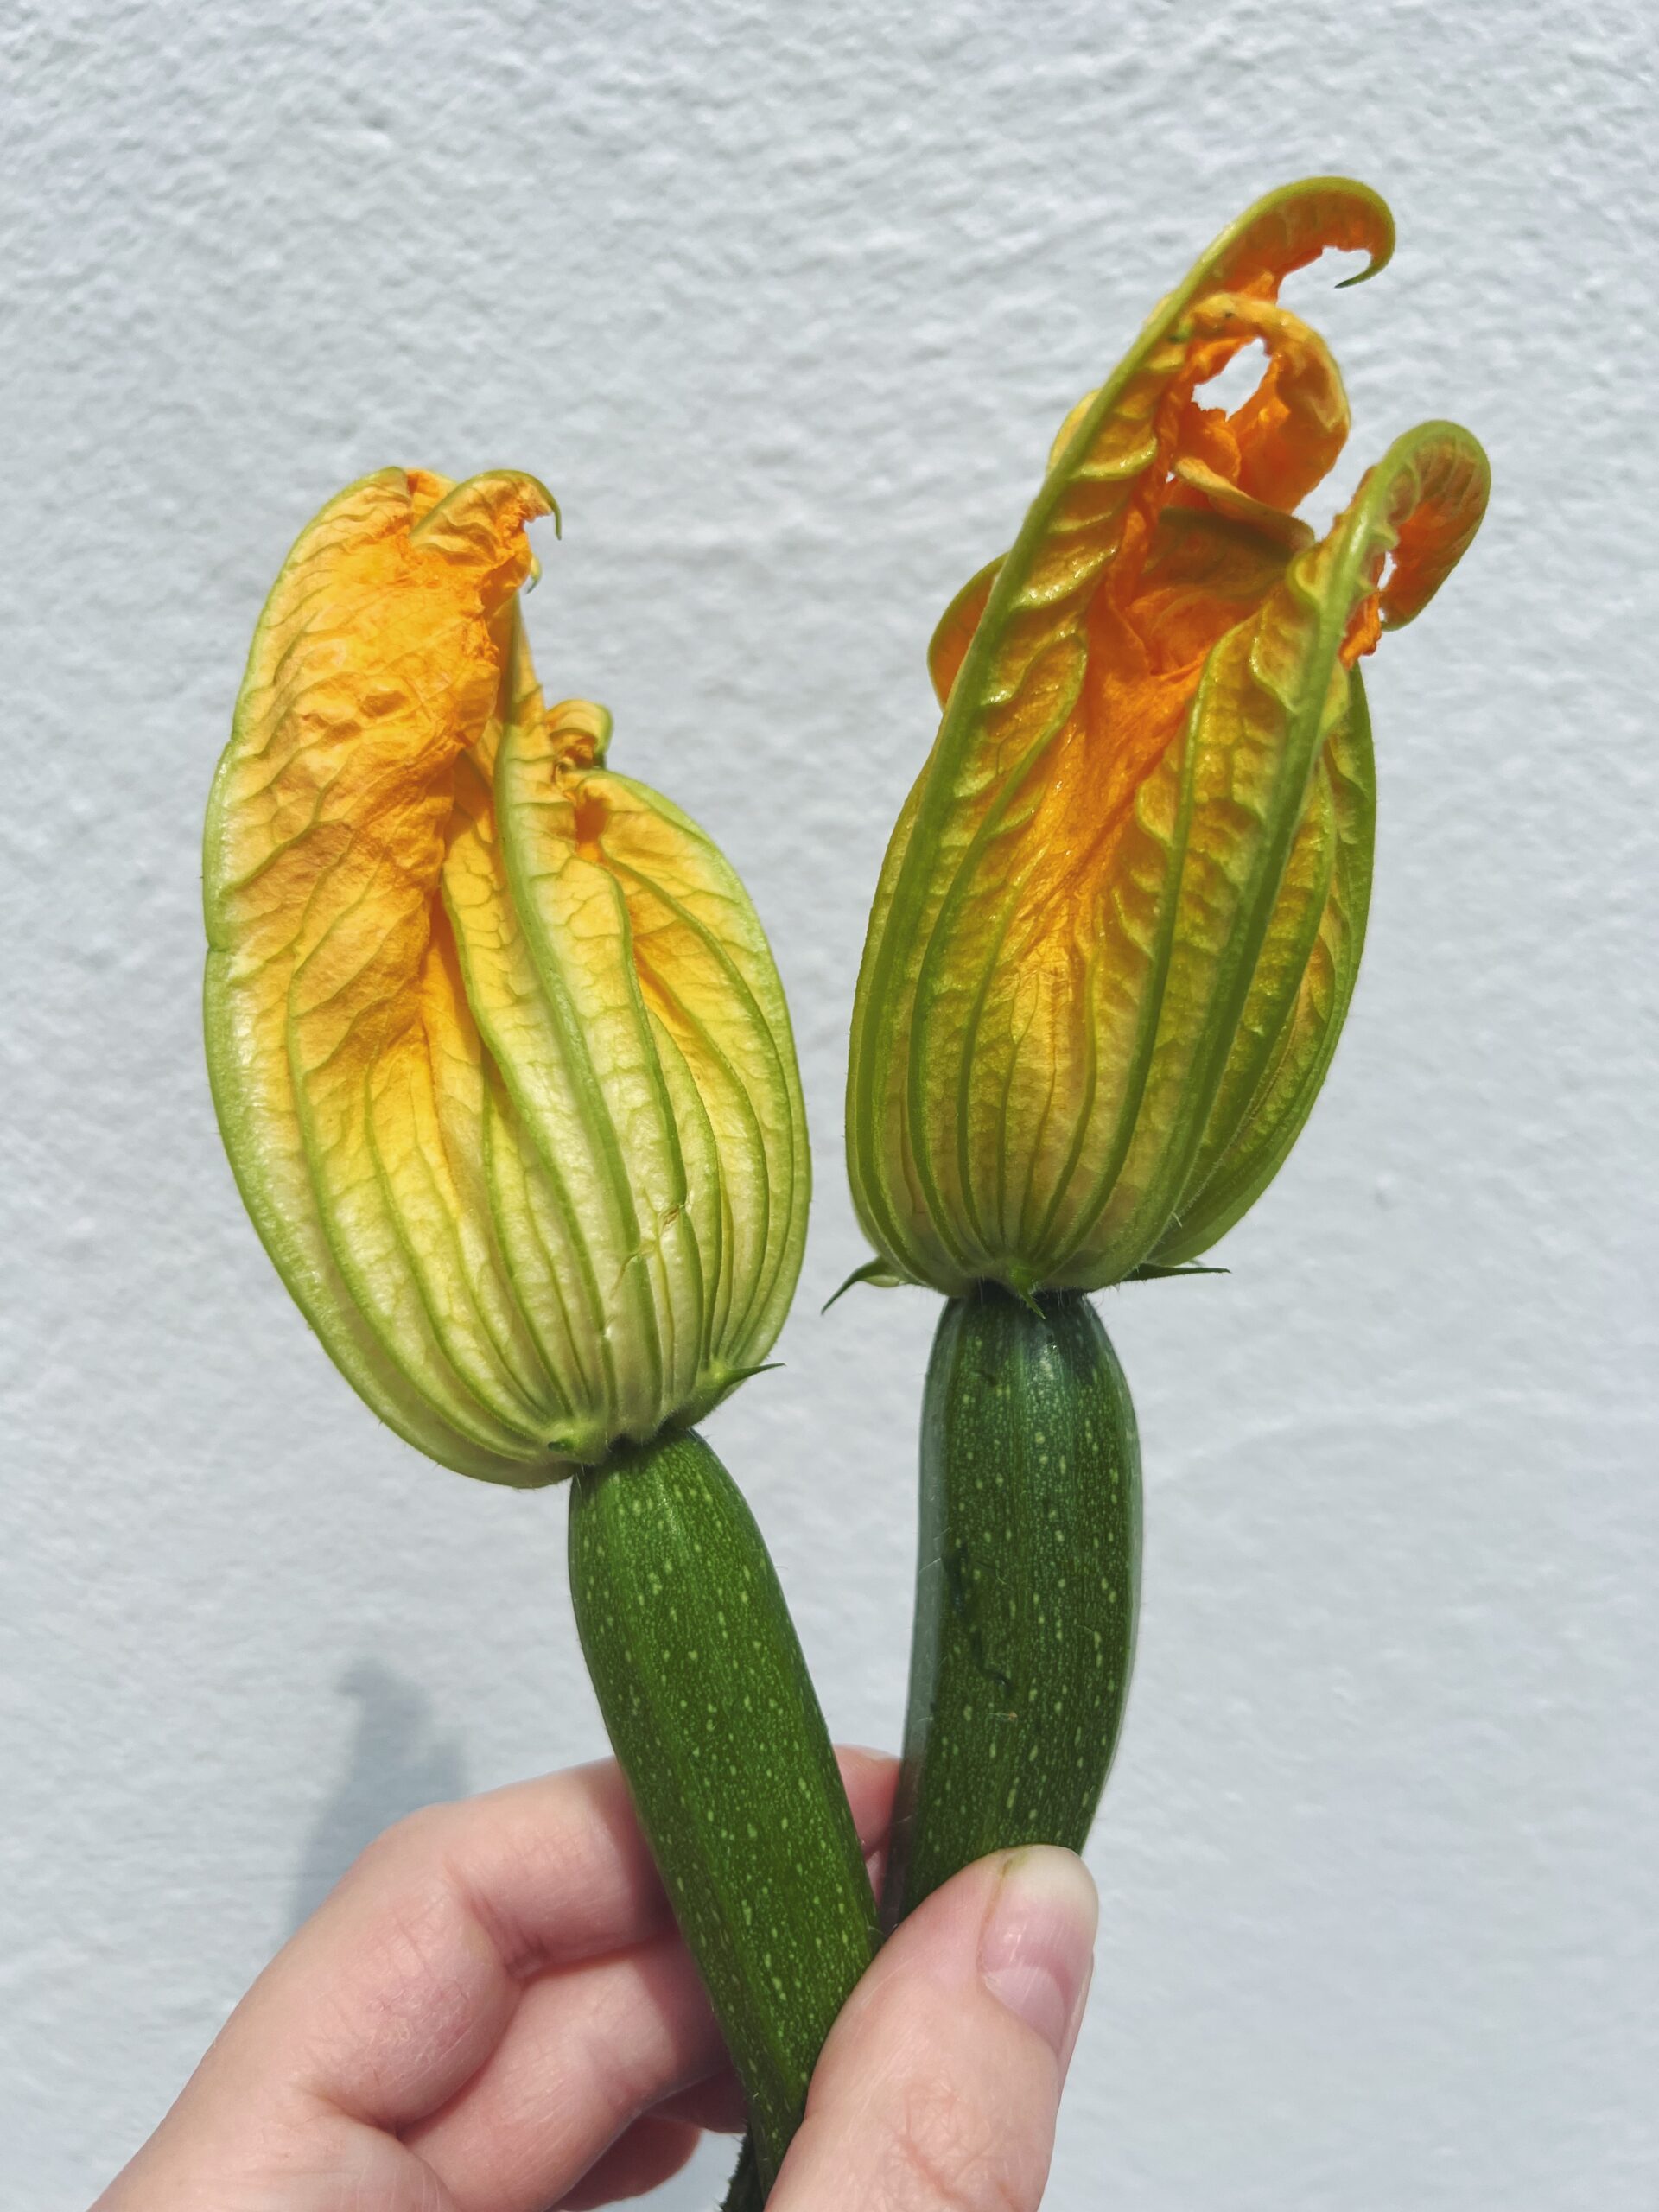 Courgette flowers freshly picked from garden